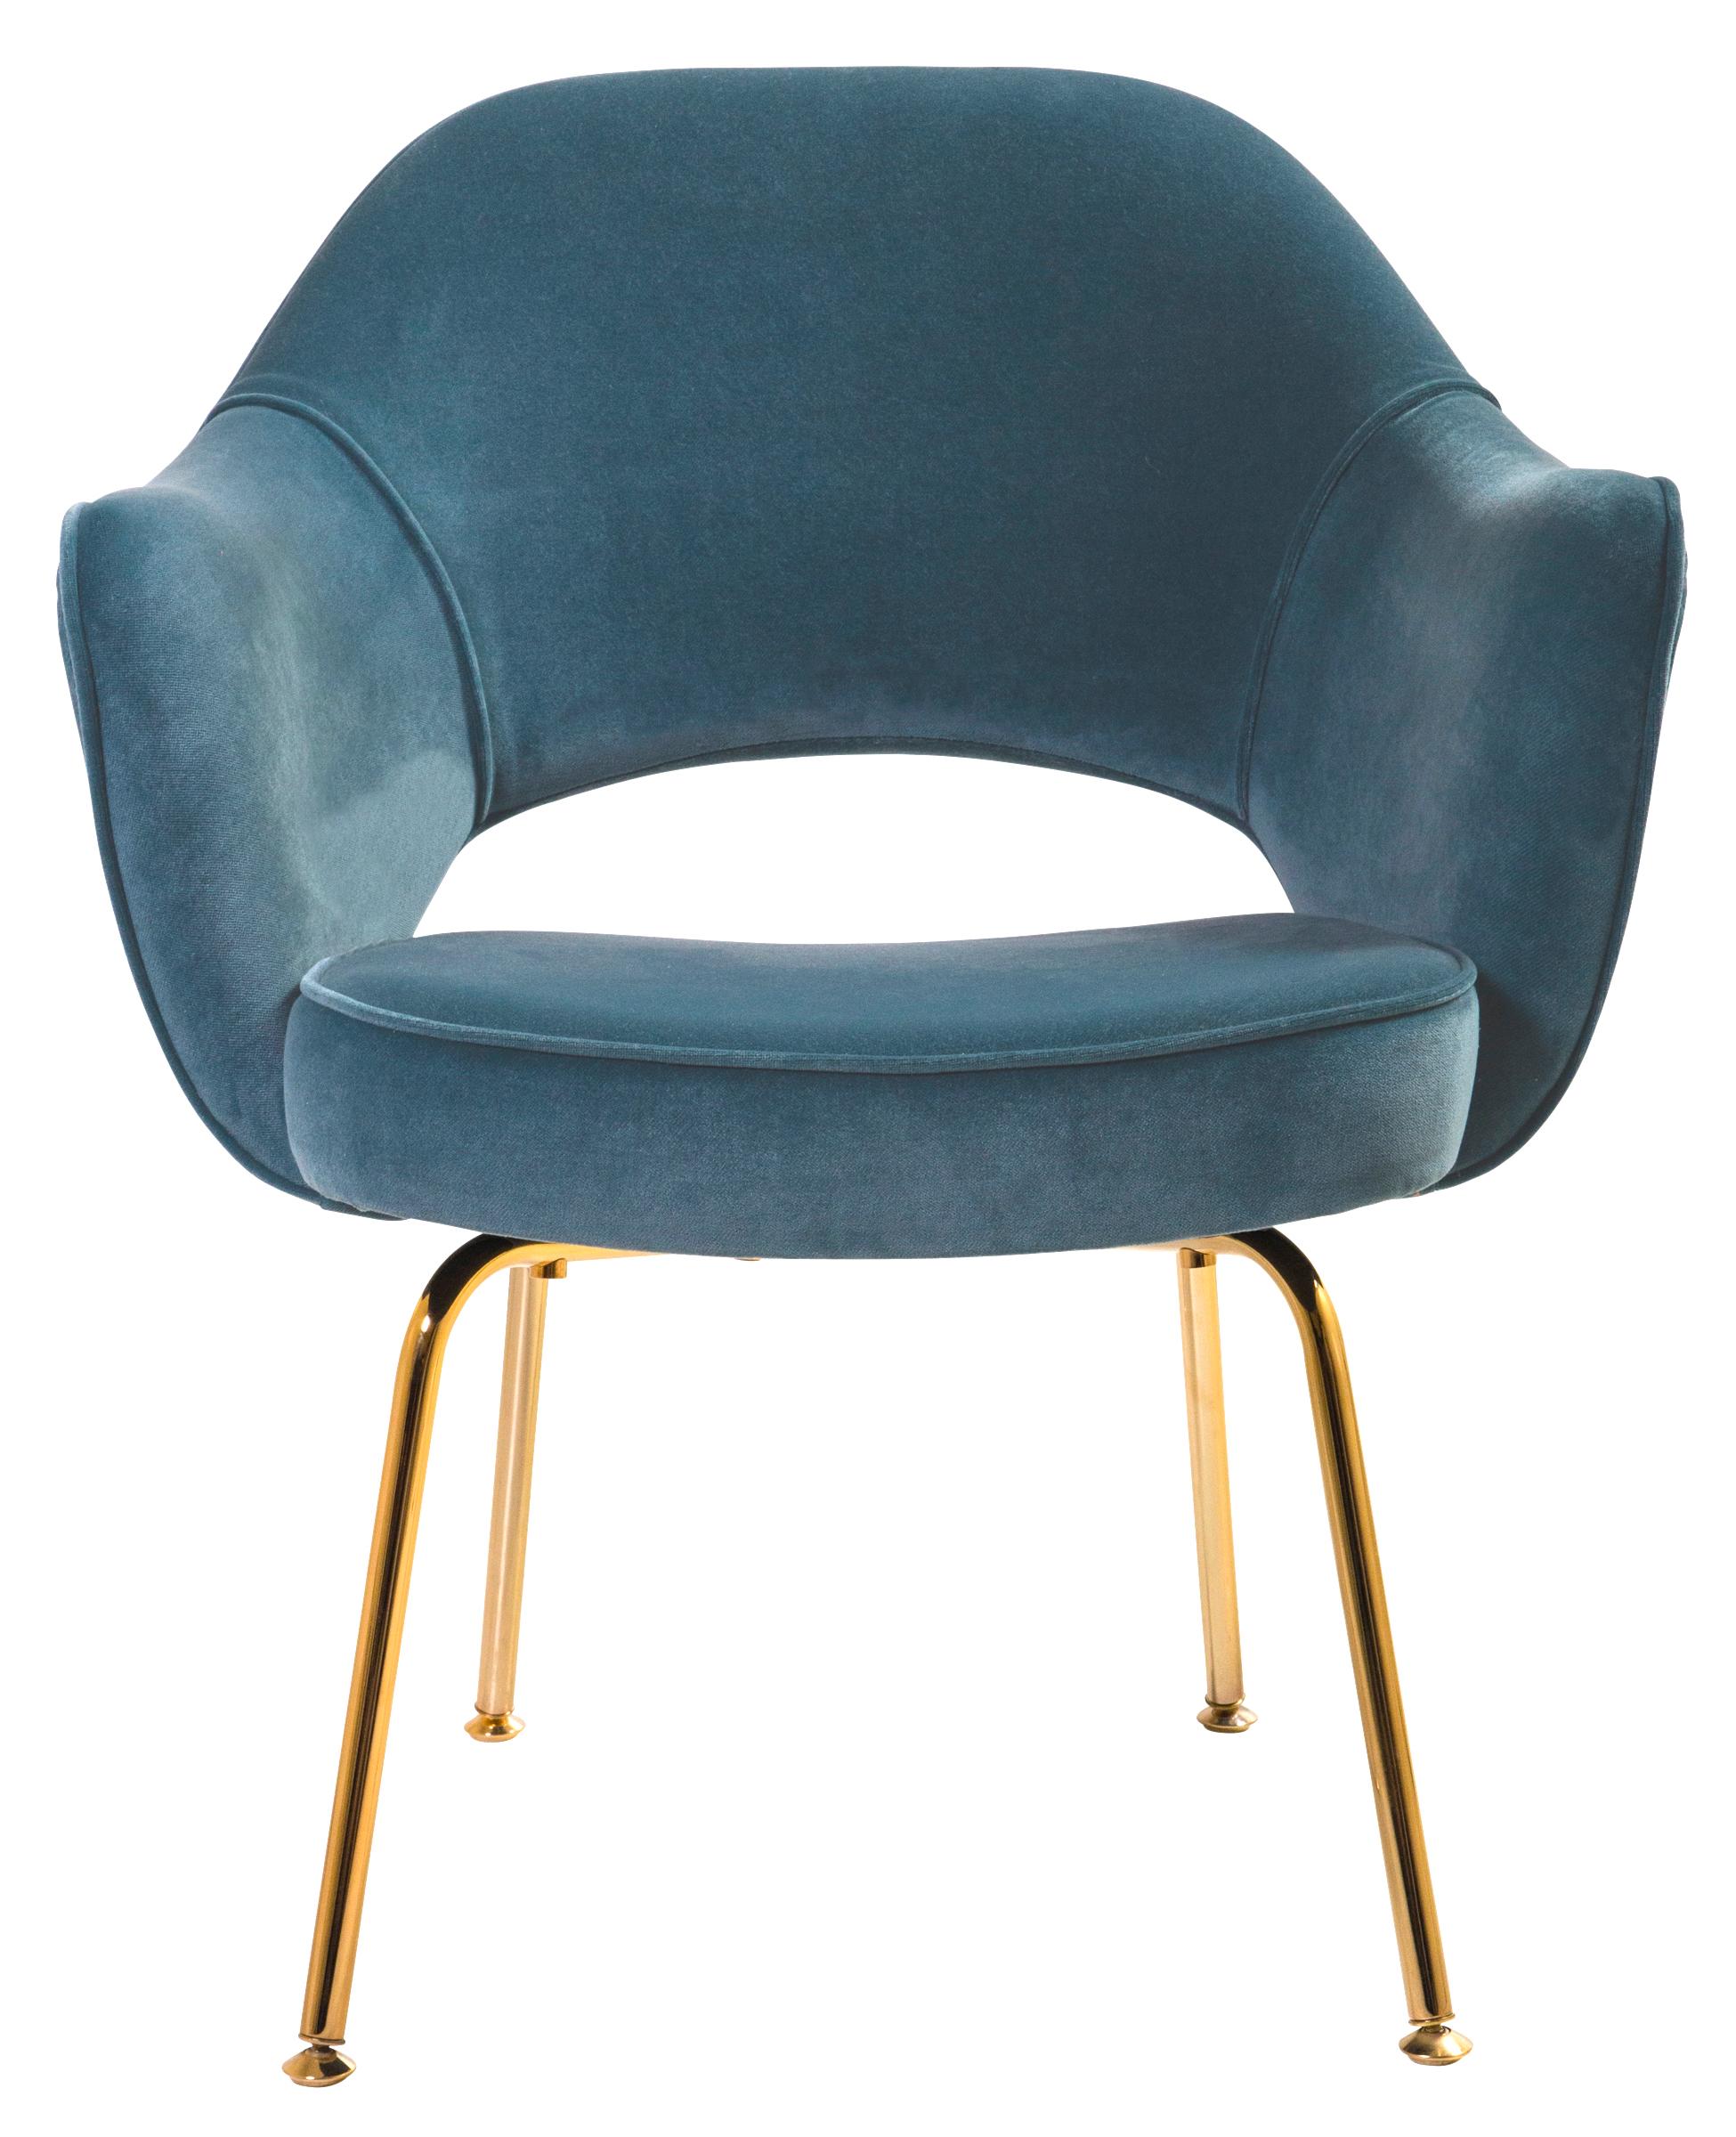 American Saarinen Executive Arm Chairs in Pavo Blue Velvet, Gold Edition, Pair For Sale